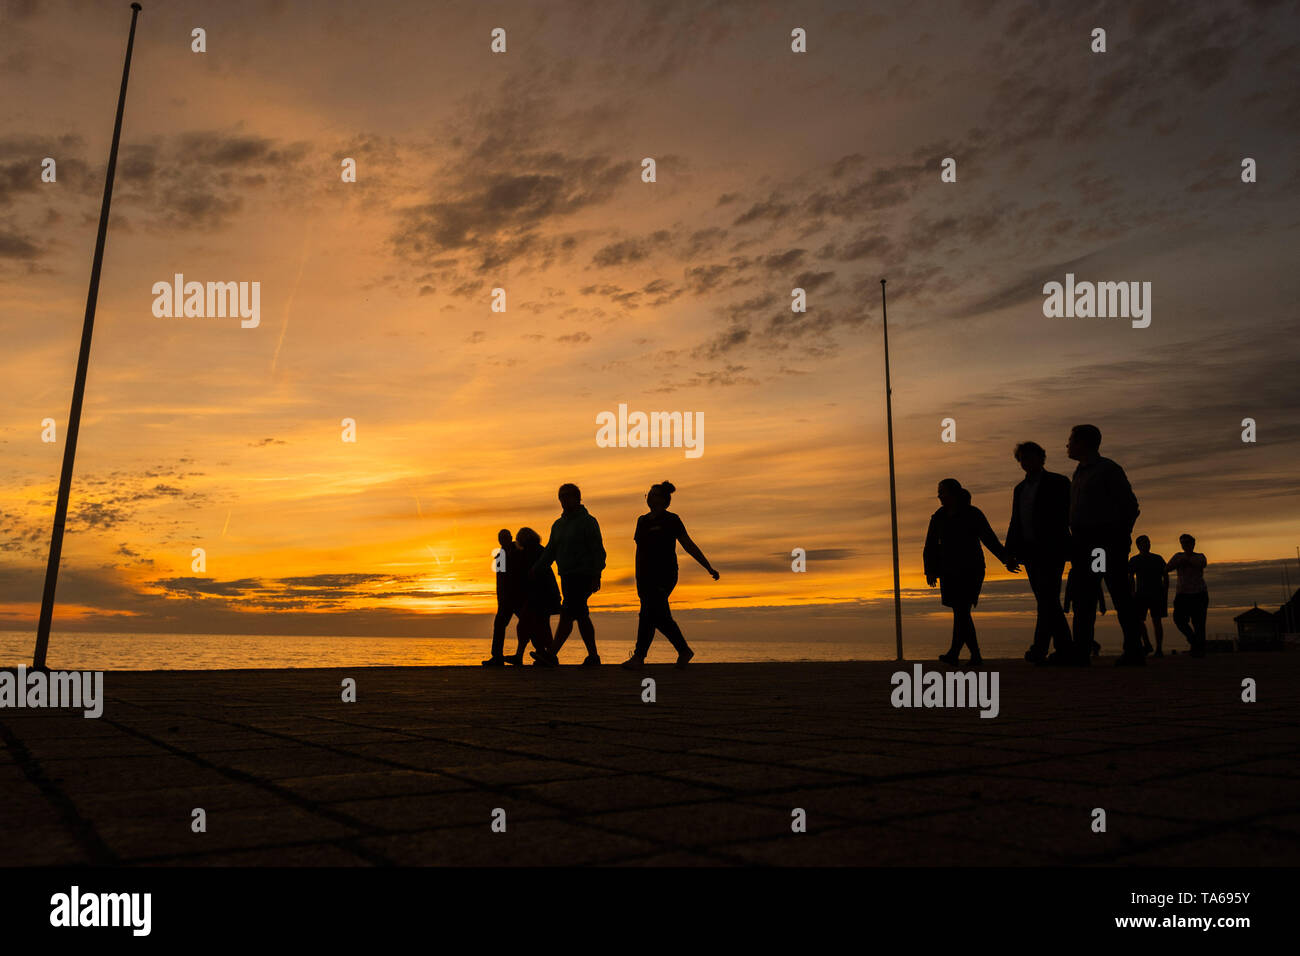 Aberystwyth Wales UK, Wednesday 22 May 2019  UK Weather: People silhouetted  strolling along the seafront promenade at sunset in Aberystwyth on a mild May evening, at the end of a day of warm spring sunshine on the west coast of Wales. photo credit: Keith Morris / Alamy Live News Stock Photo